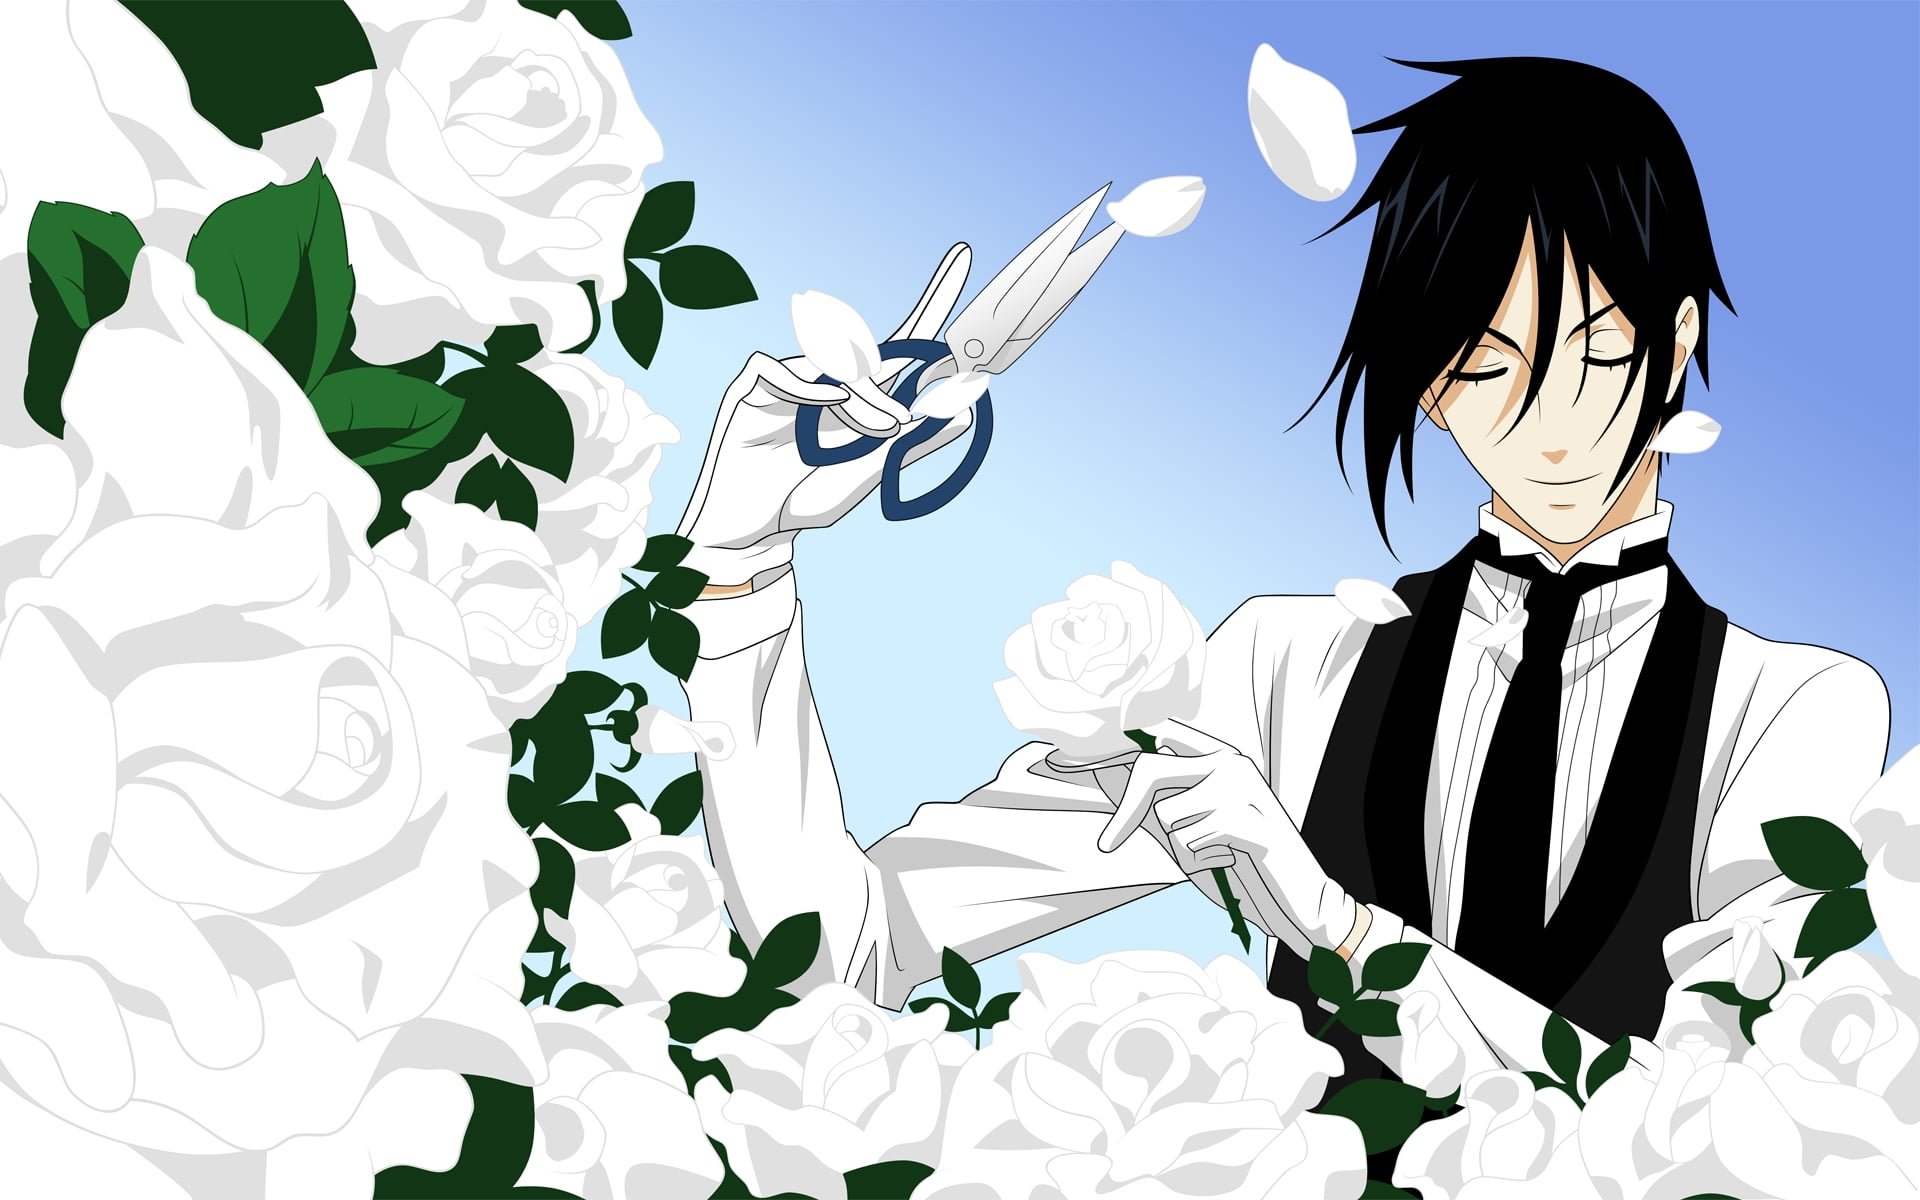 Male Anime Character With Black Hair Wearing White Dress